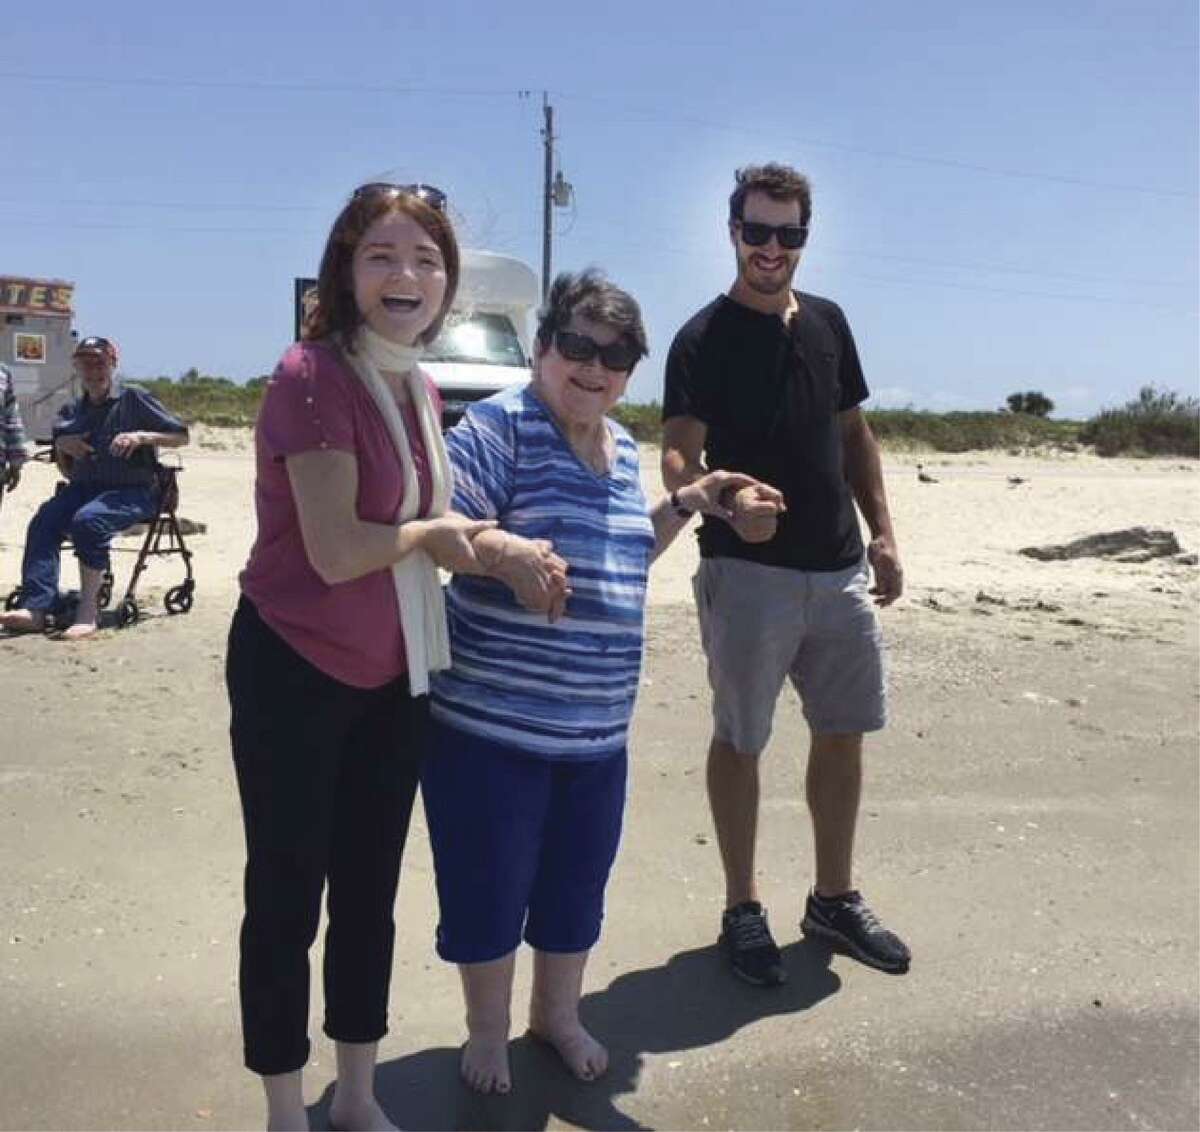 Treemont residents enjoyed a trip to Galveston, including a visit to the beach.